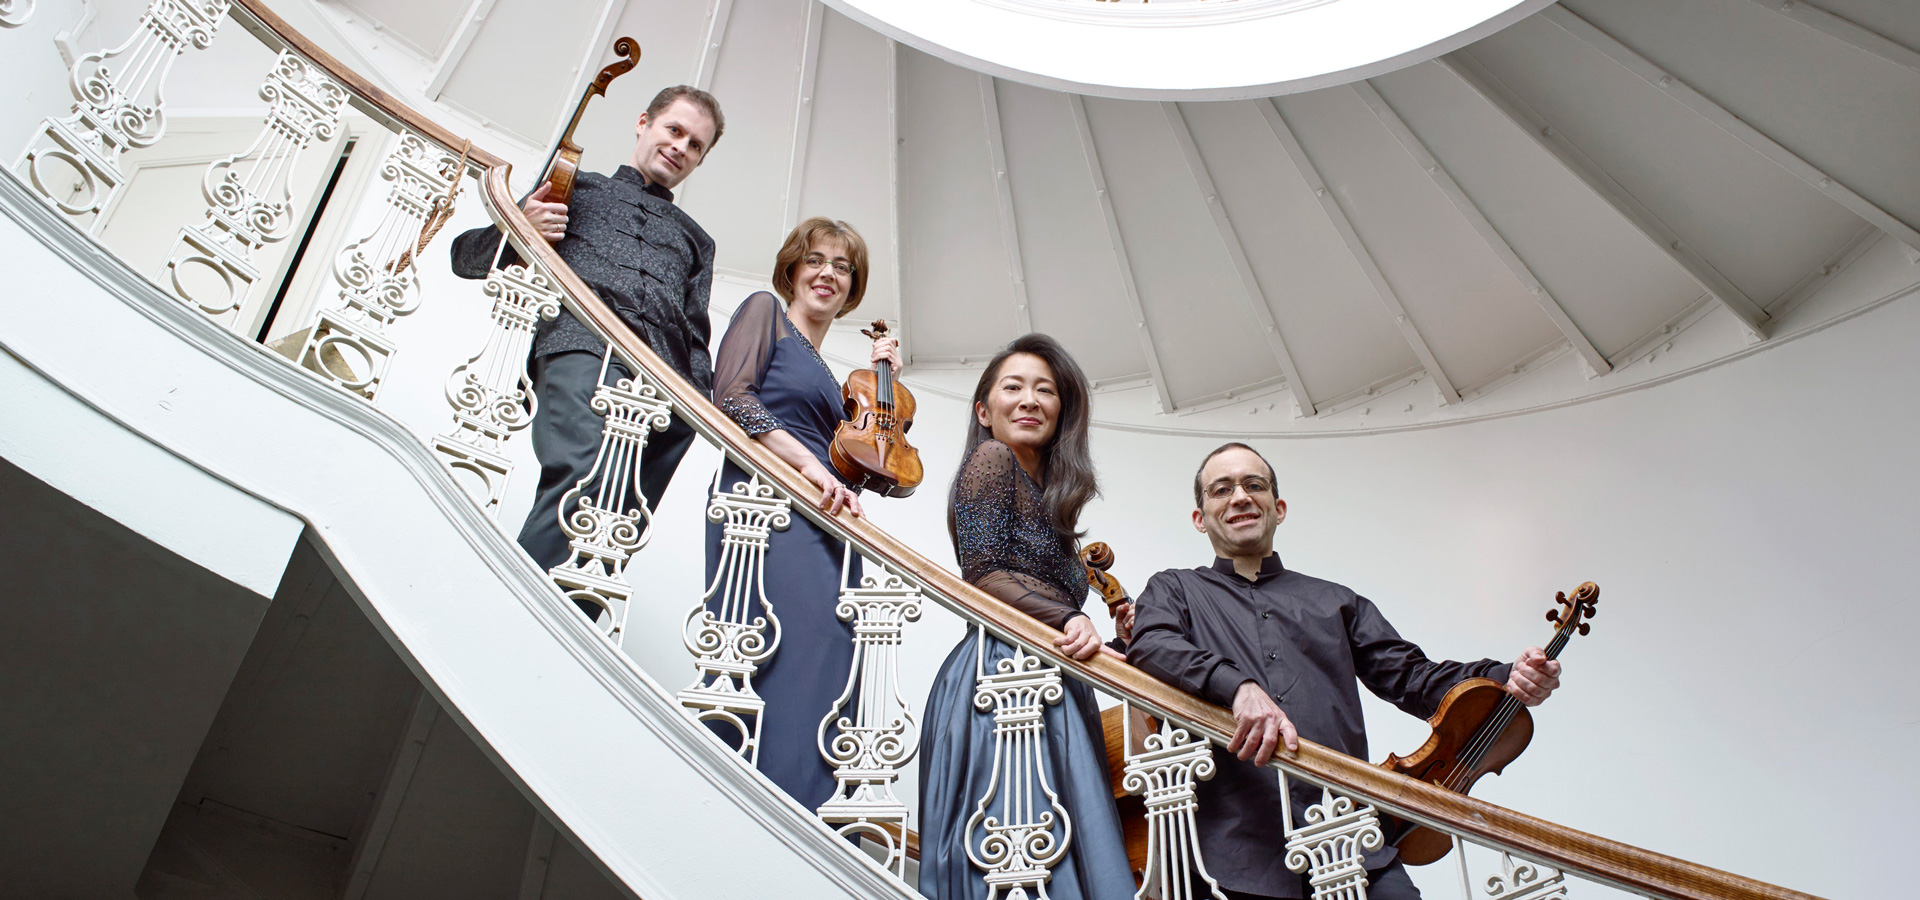 The Brentano String Quartet, two men and two women, hold their instruments and smile down at the camera from a white spiral staircase.